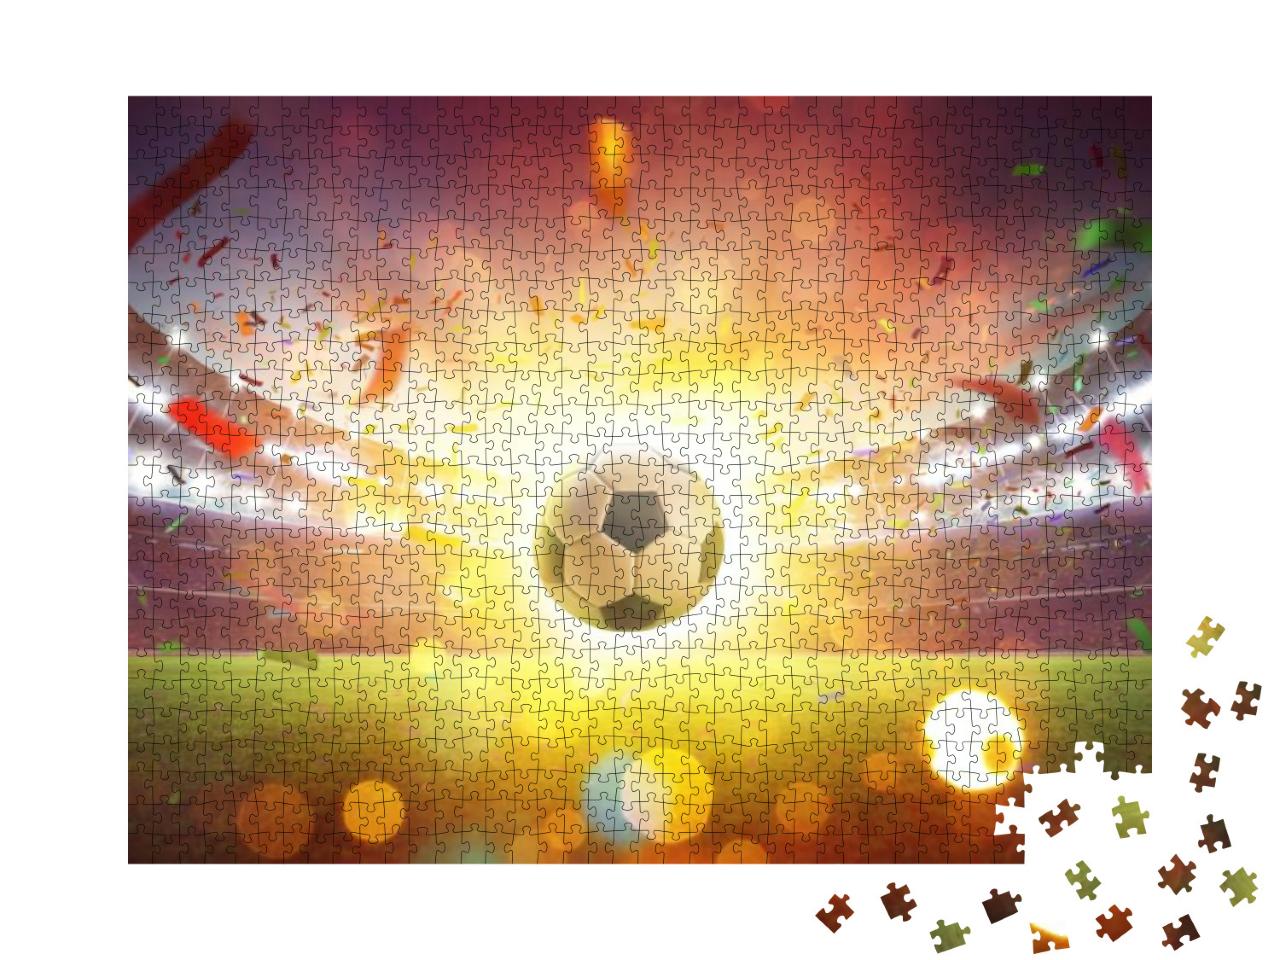 Floating Soccer Ball At the Football Stadium with Smoke &... Jigsaw Puzzle with 1000 pieces